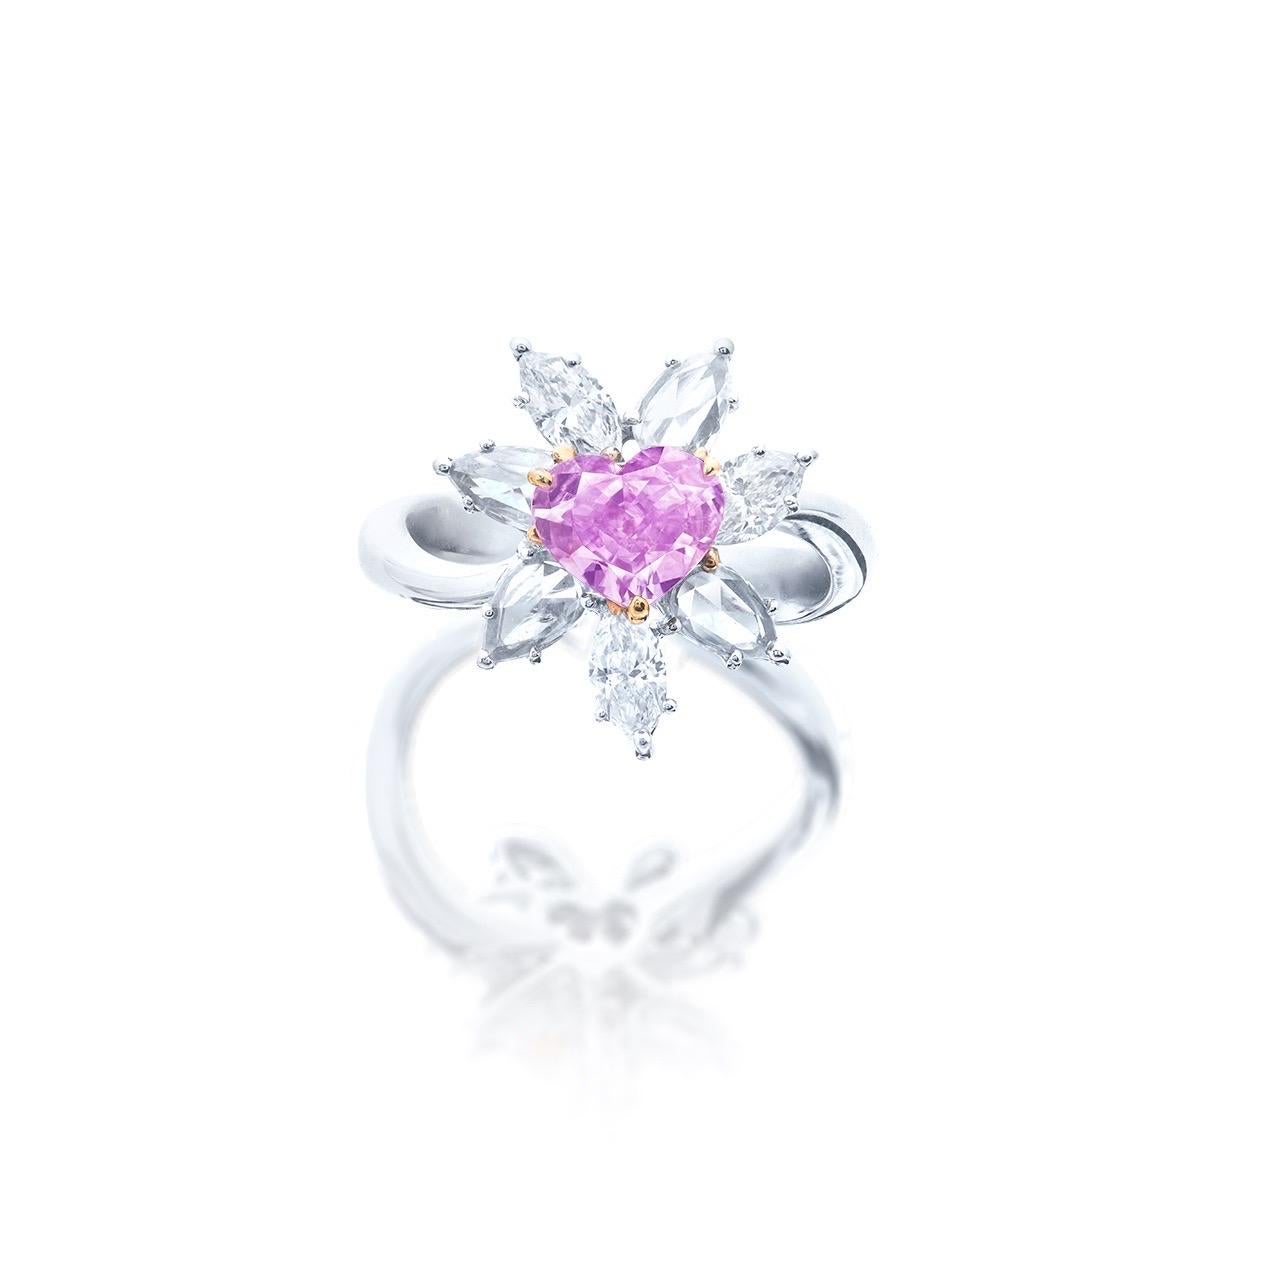 From Emilio Jewelry a dealer and wholesaler Located on New York's iconic Fifth Avenue,
Main stone: 1.00 carat + Fancy Intense Pinkish Purple
mounting: 3 fancy-turned marquise white diamonds totaling approximately 0.501 carats, 4 rose-cut white